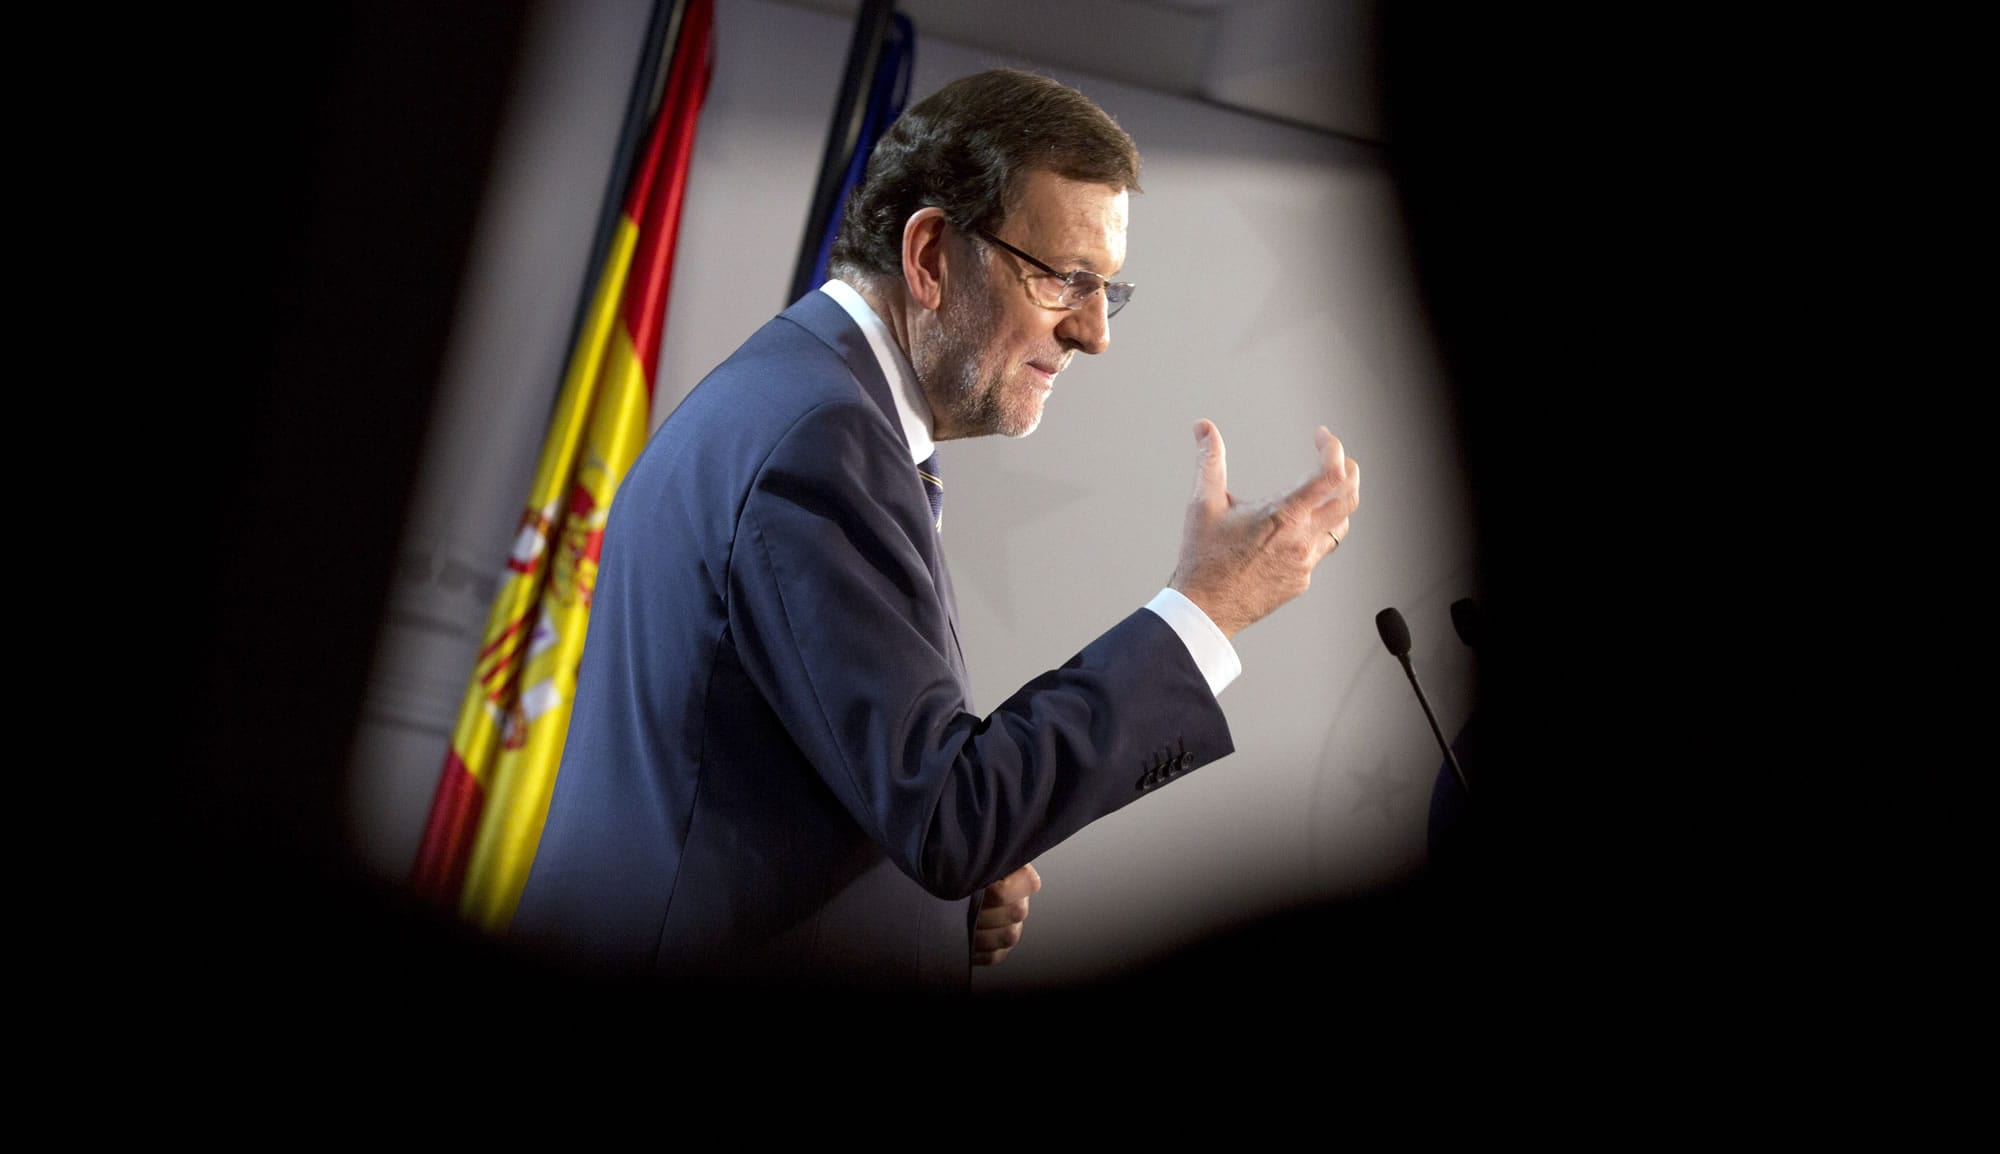 Spanish Prime Minister Mariano Rajoy gestures while speaking during a media conference after an EU summit in Brussels on Friday.